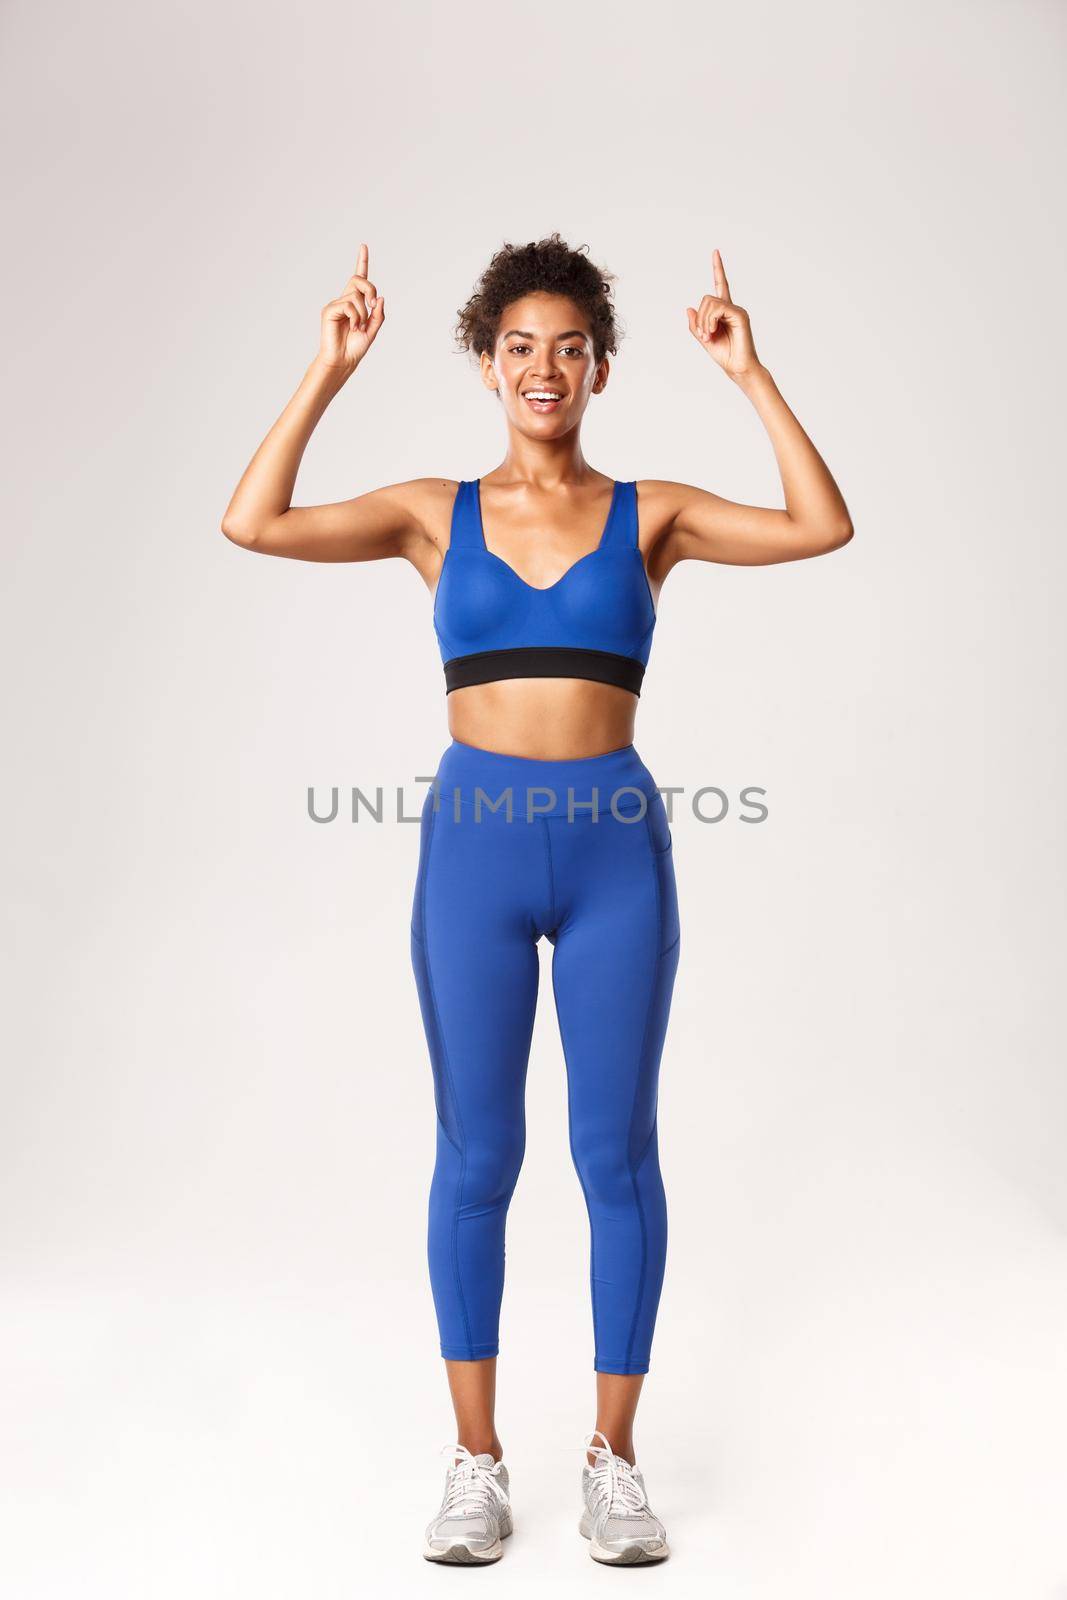 Full length of attractive slim african-american sportswoman, athlete pointing fingers up at logo or brand advertisement, standing in workout outfit over white background.